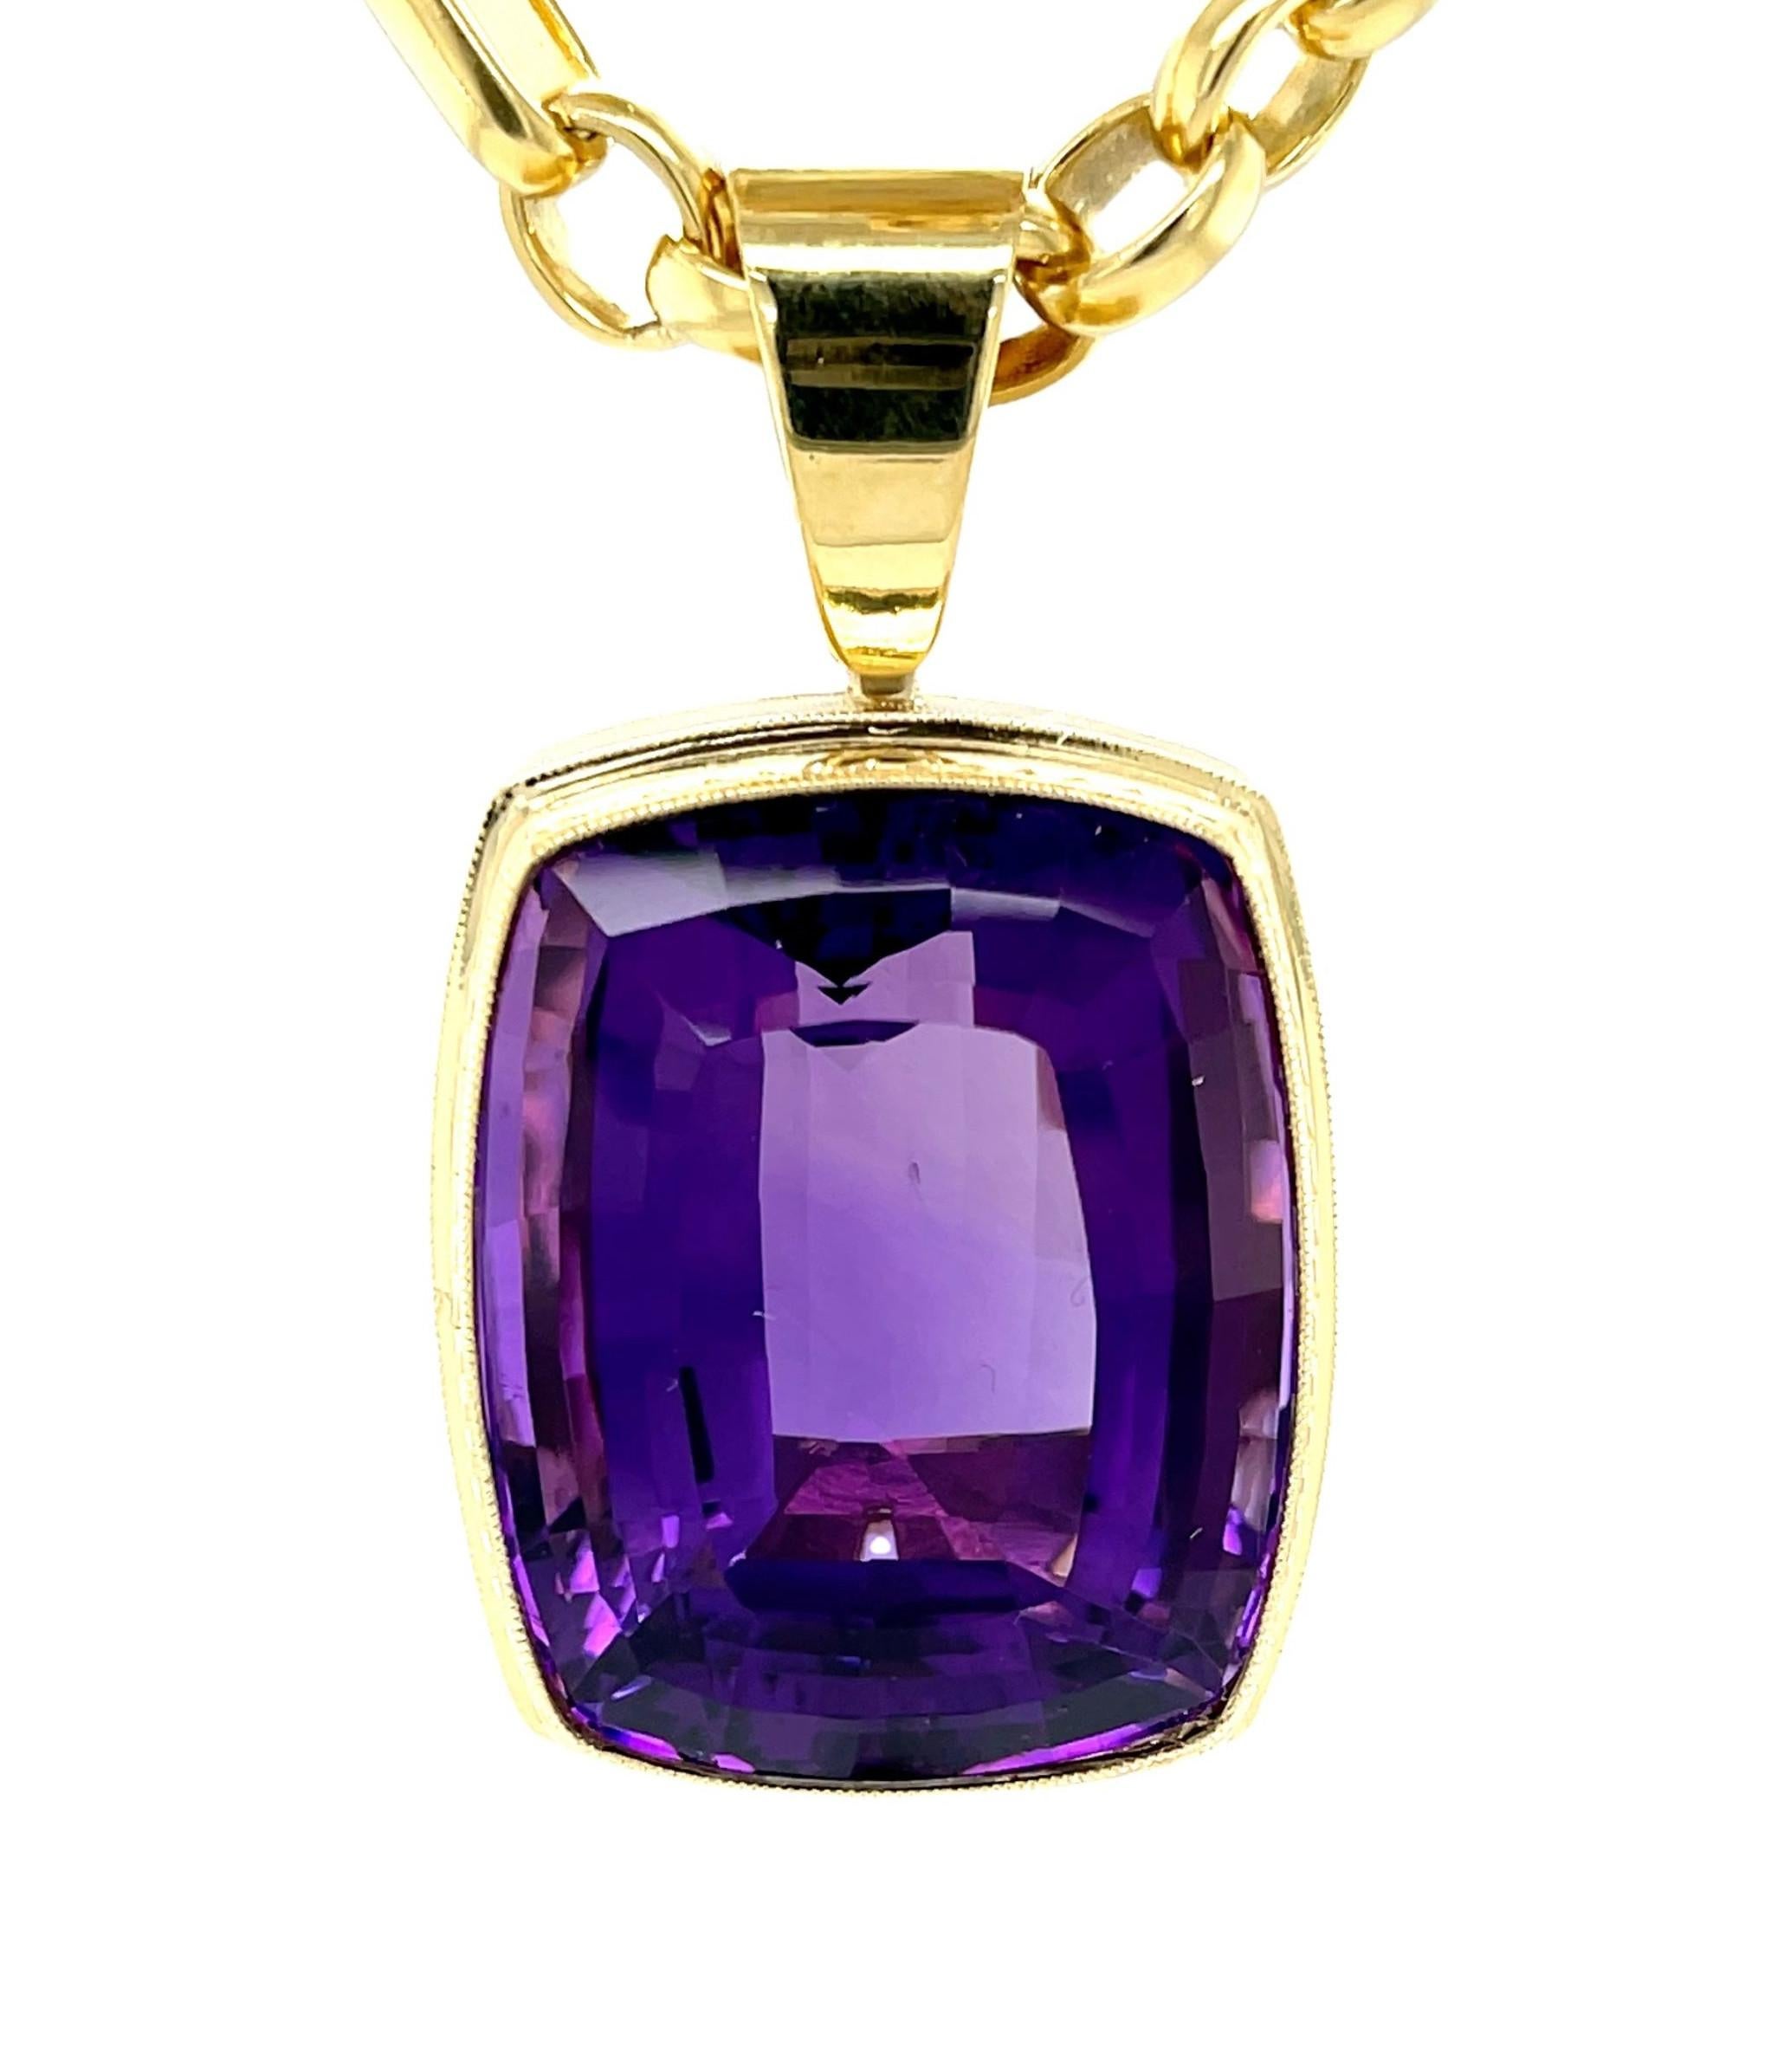 This spectacular handmade pendant showcases an absolute gem amethyst cushion weighing 77.89 carats! An exceptionally fine gemstone with quintessential amethyst color - rich royal purple, this is a real treasure to behold! Our Master Jeweler in Los